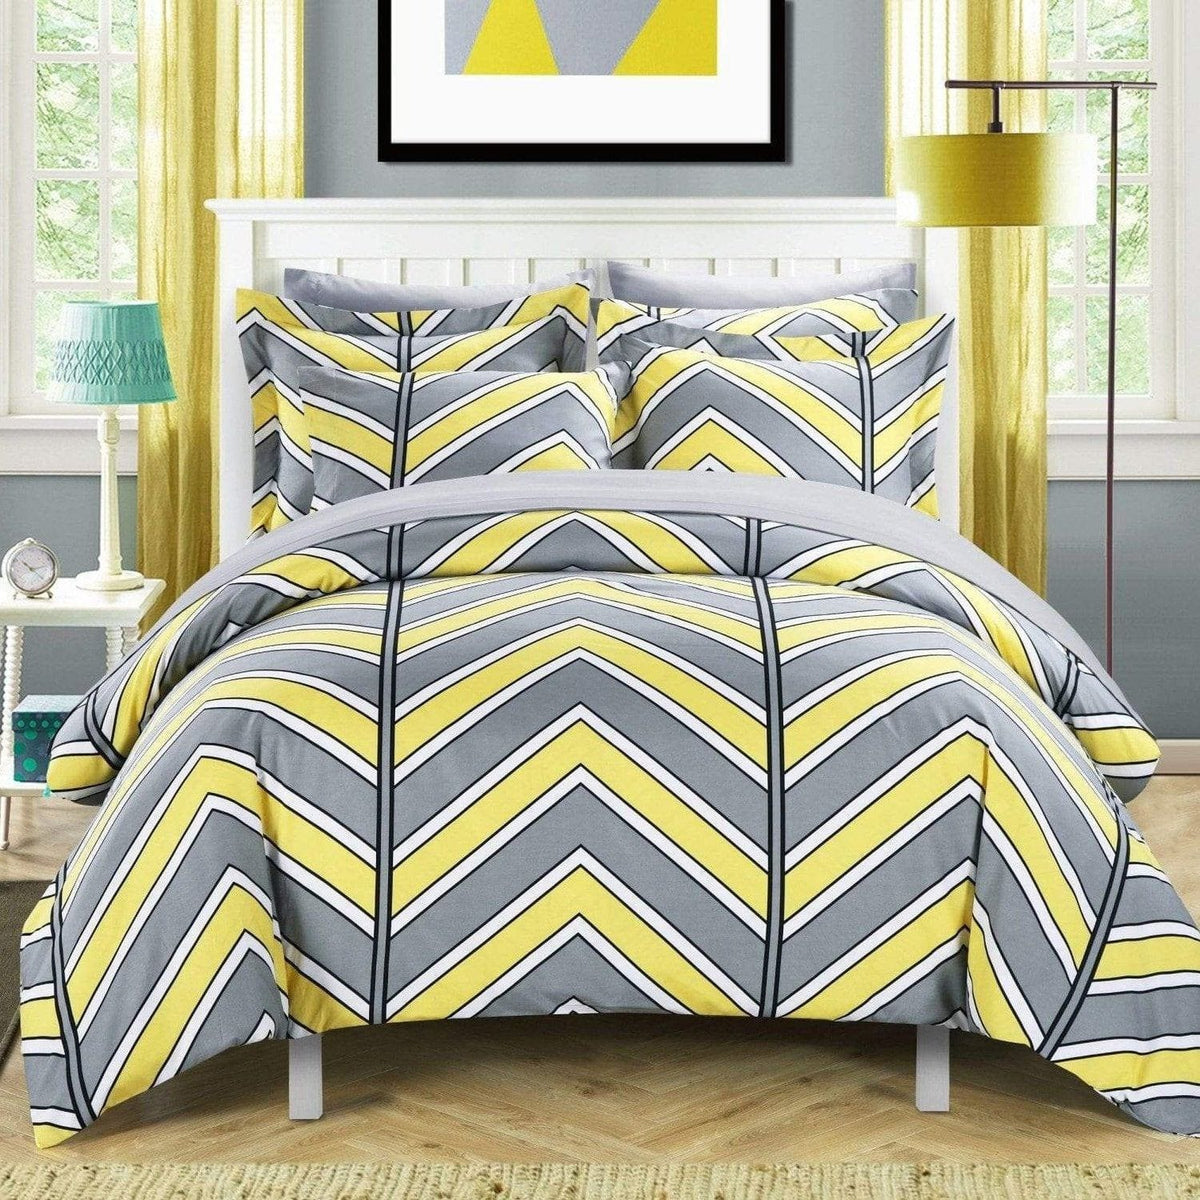 Chic Home Piper 3 Piece Striped Duvet Cover Set -Yellow